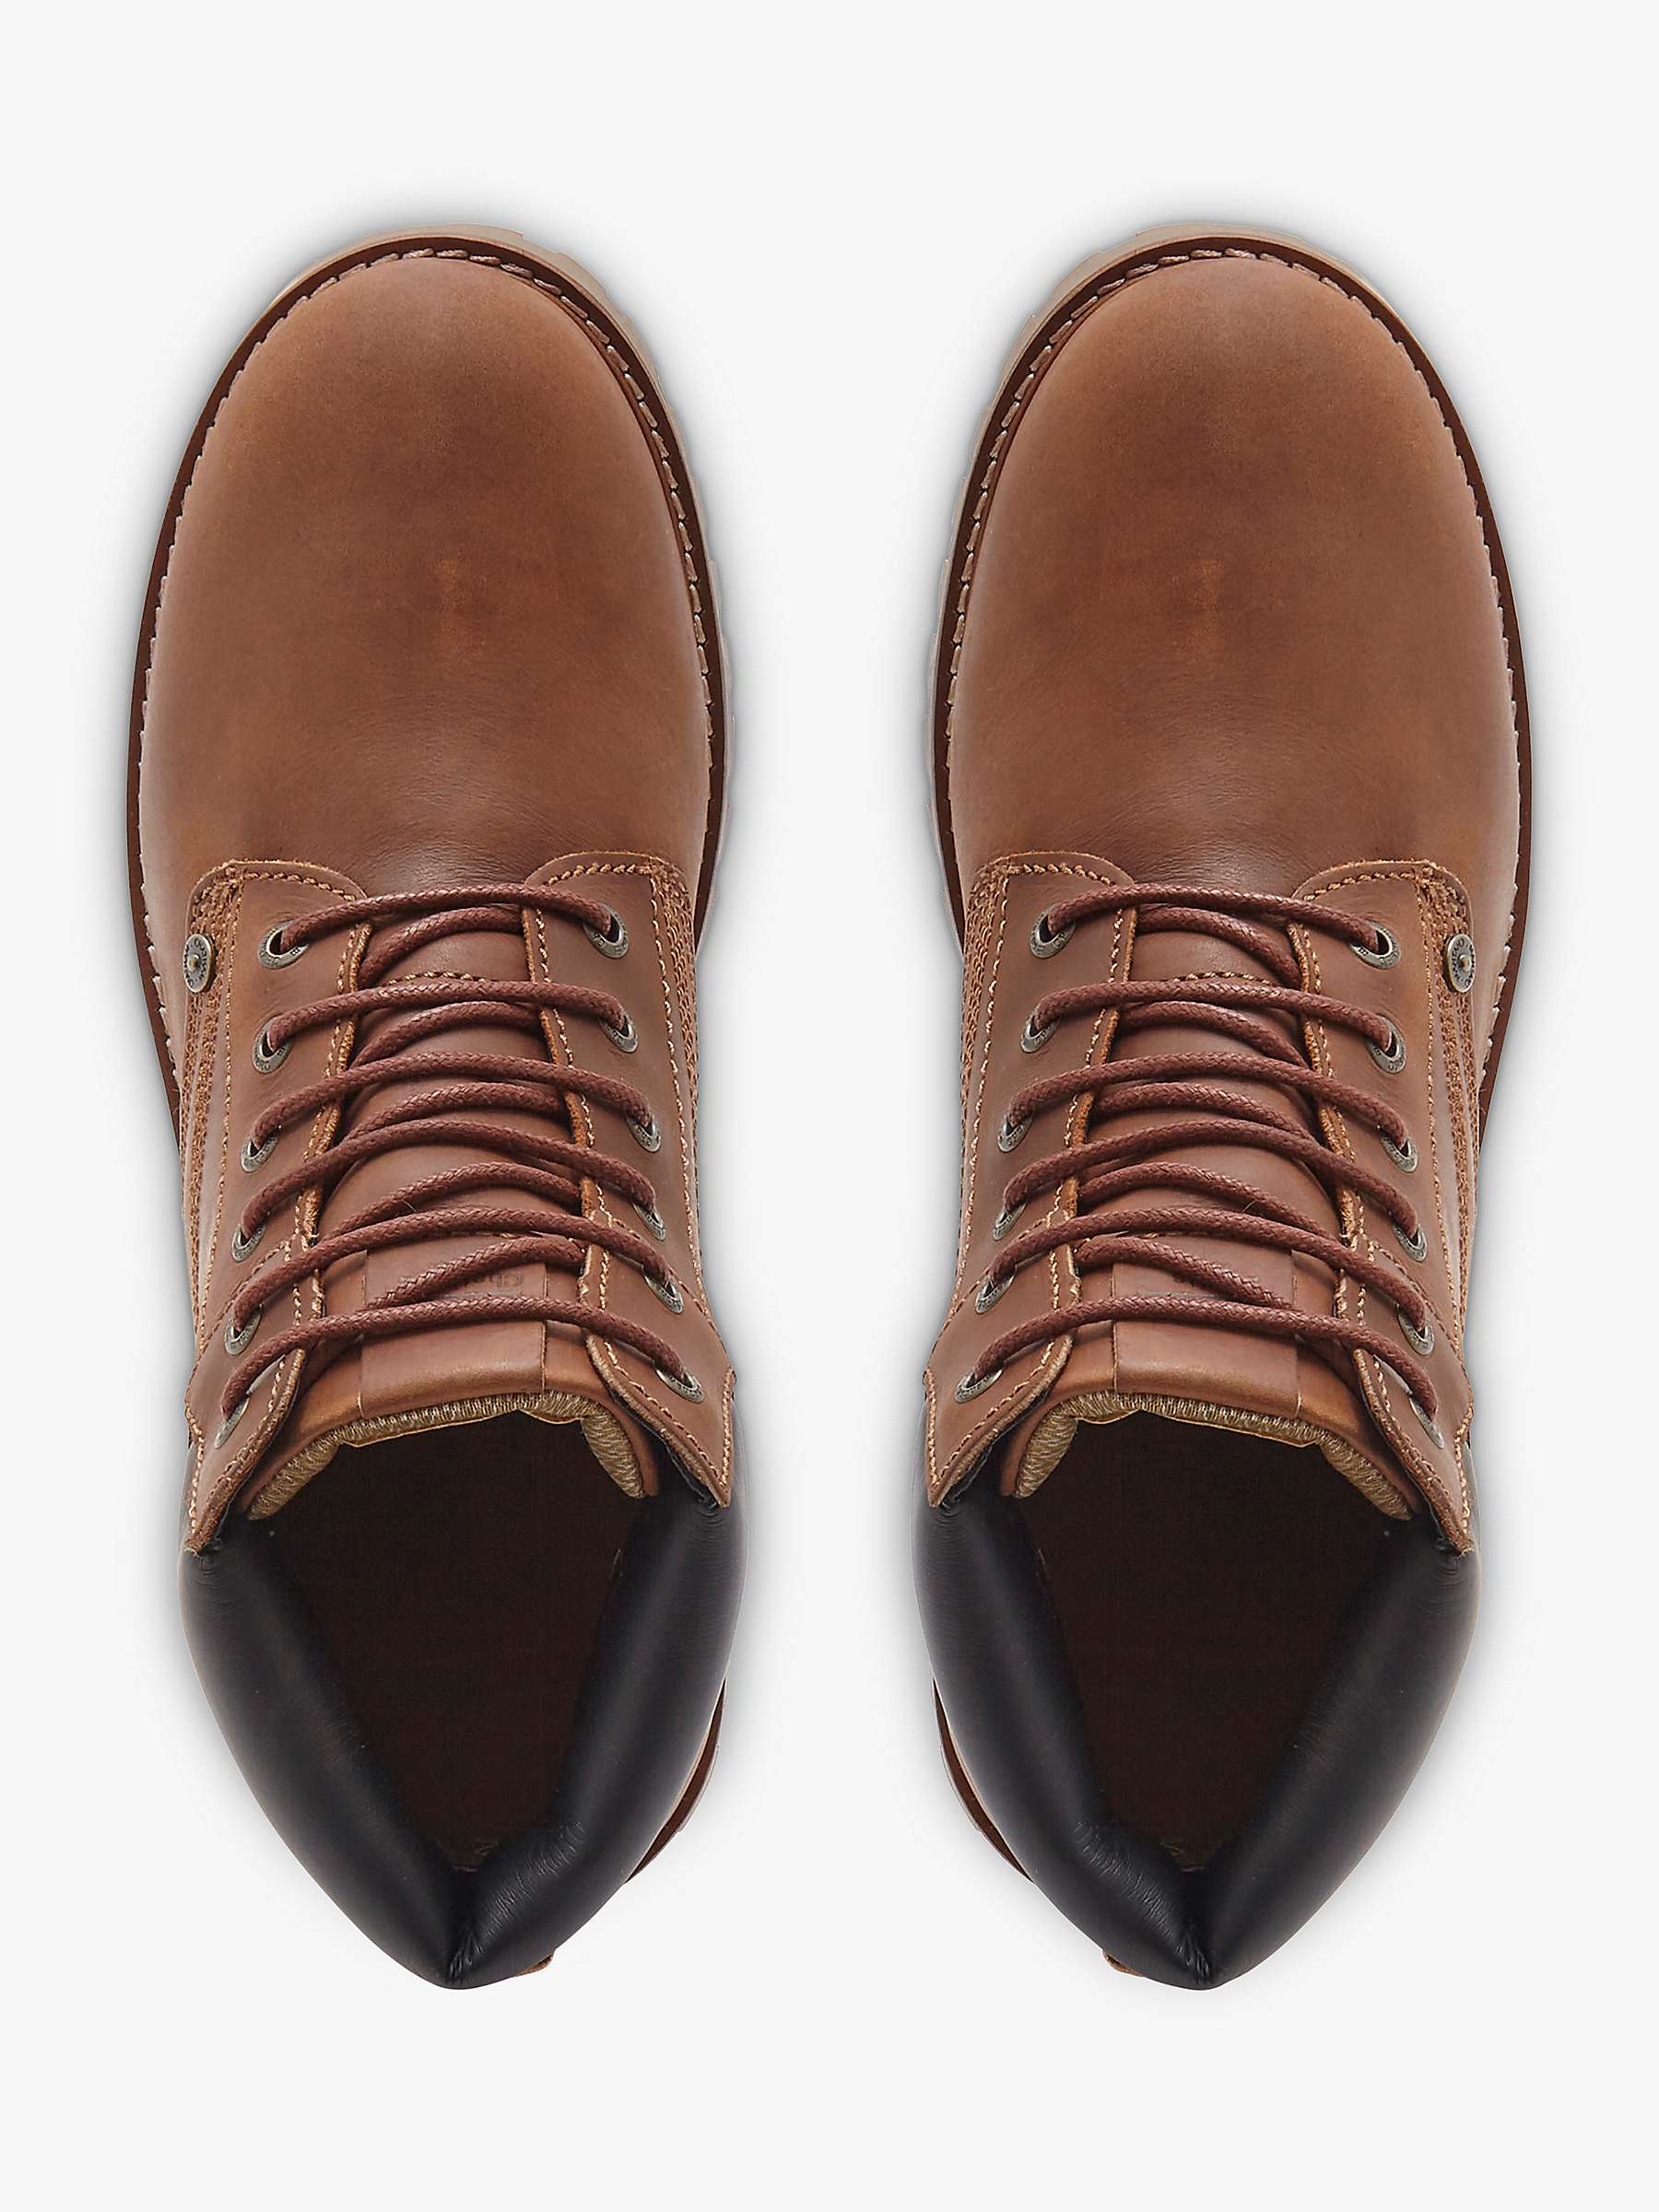 Buy Chatham Nevis Waterproof Lace Up Boots, Brown Online at johnlewis.com